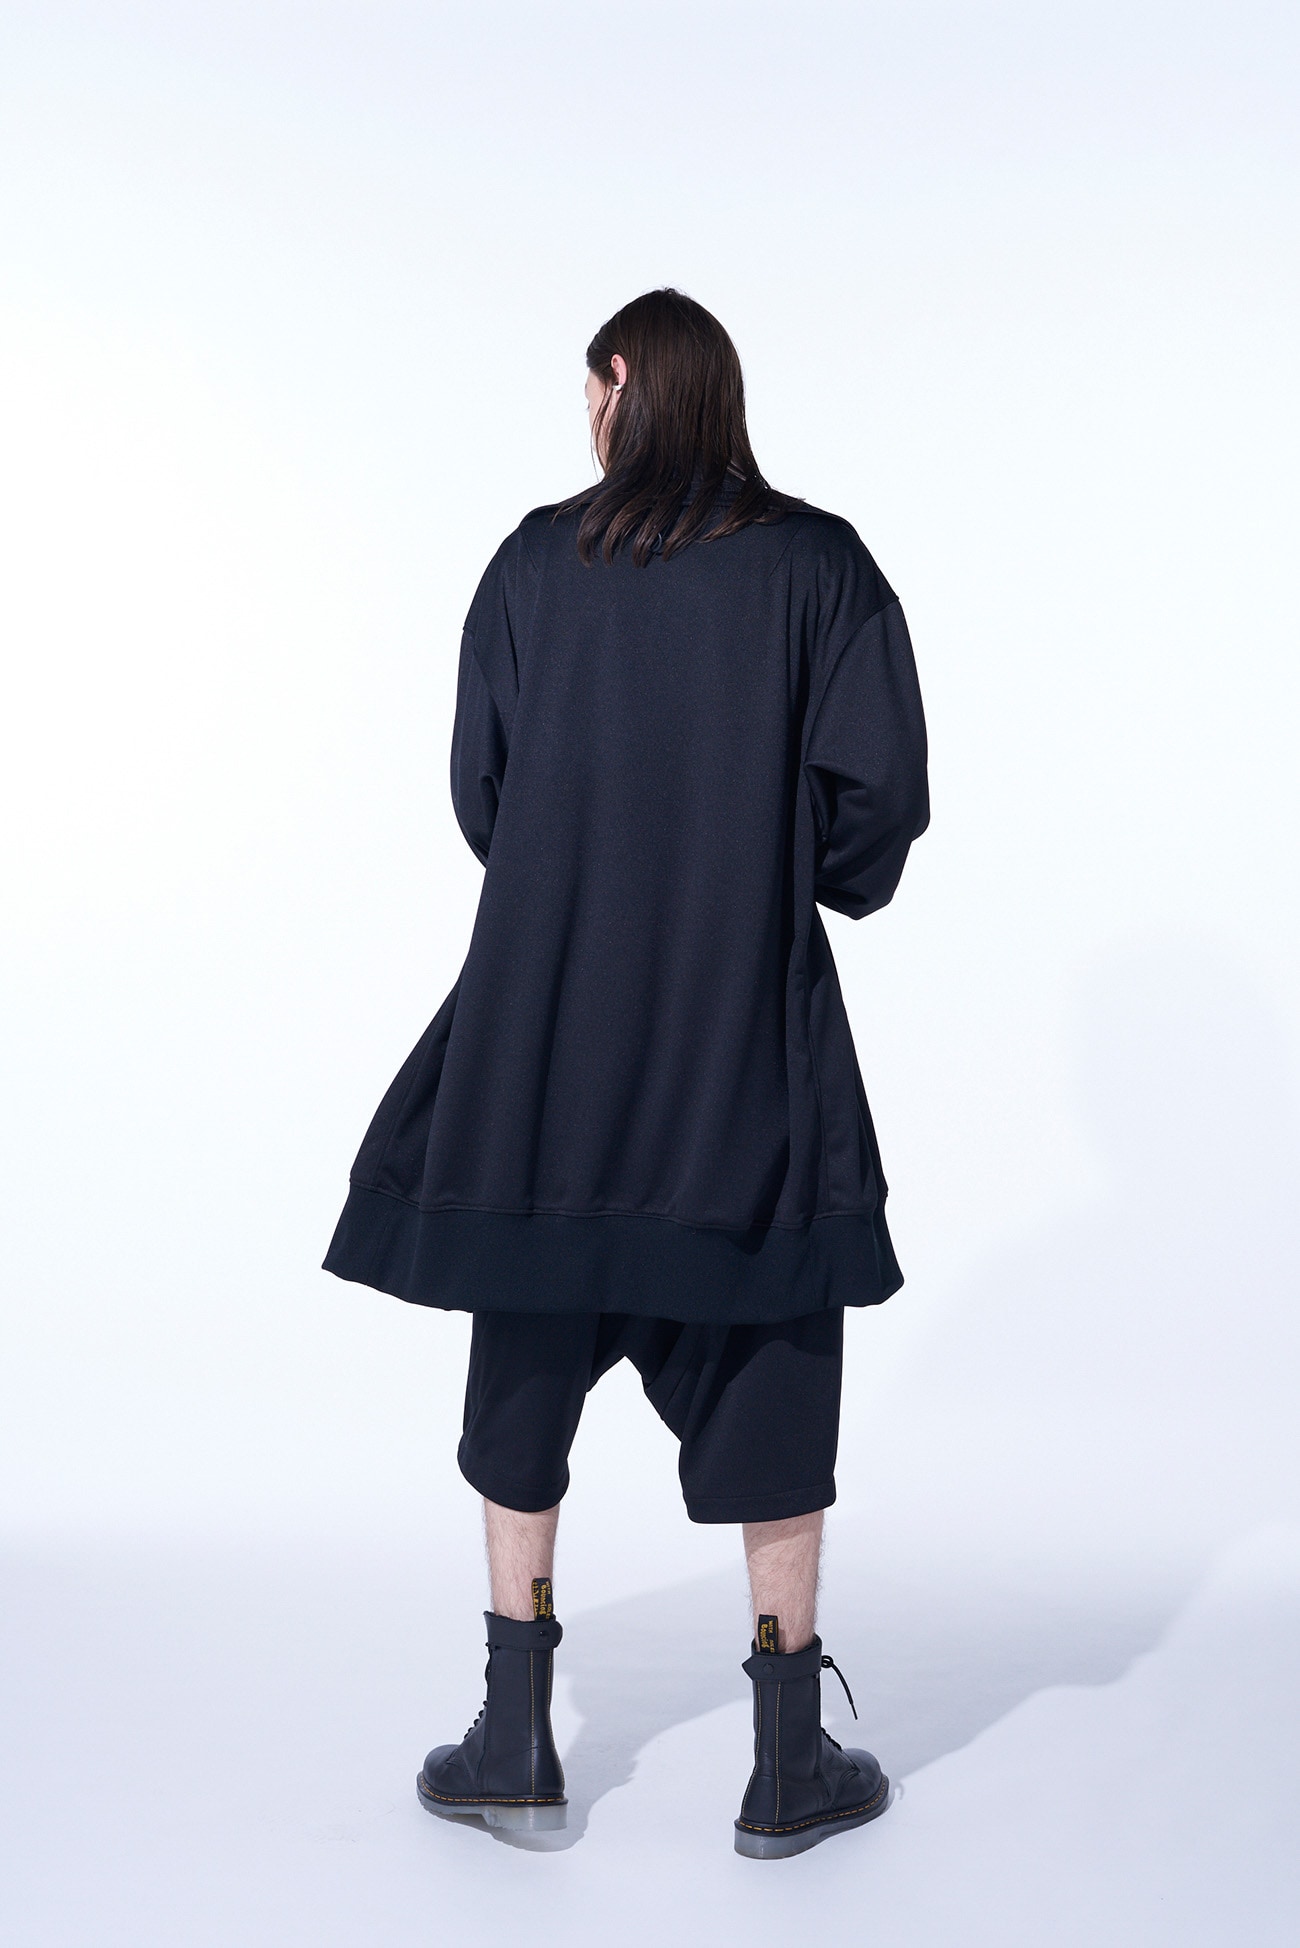 POLYESTER SMOOTH JERSEY OVERSIZED LONG TRUCK TOP(M Black): S'YTE 